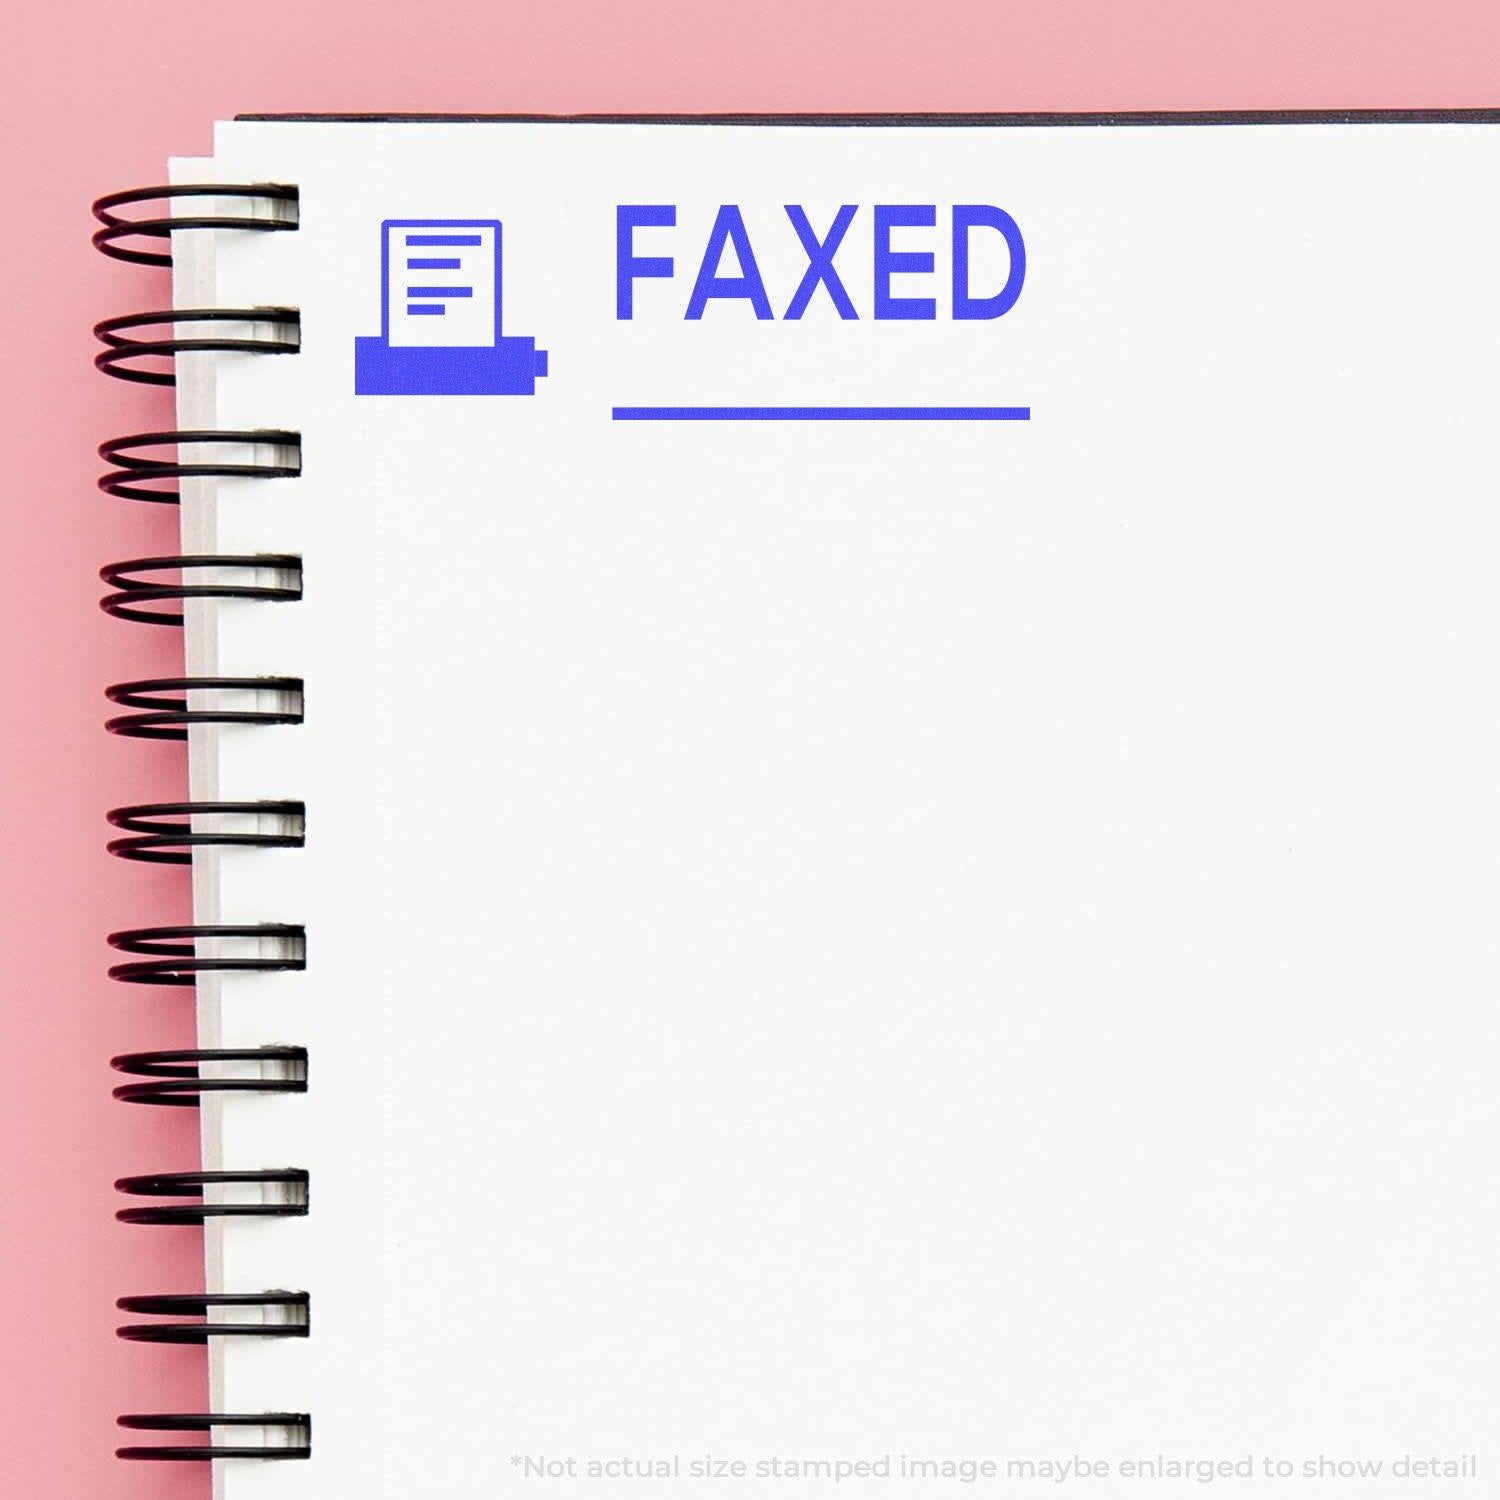 A self-inking stamp with a stamped image showing how the text "FAXED" with a small image of a fax machine on the left and a line underneath the text is displayed after stamping.